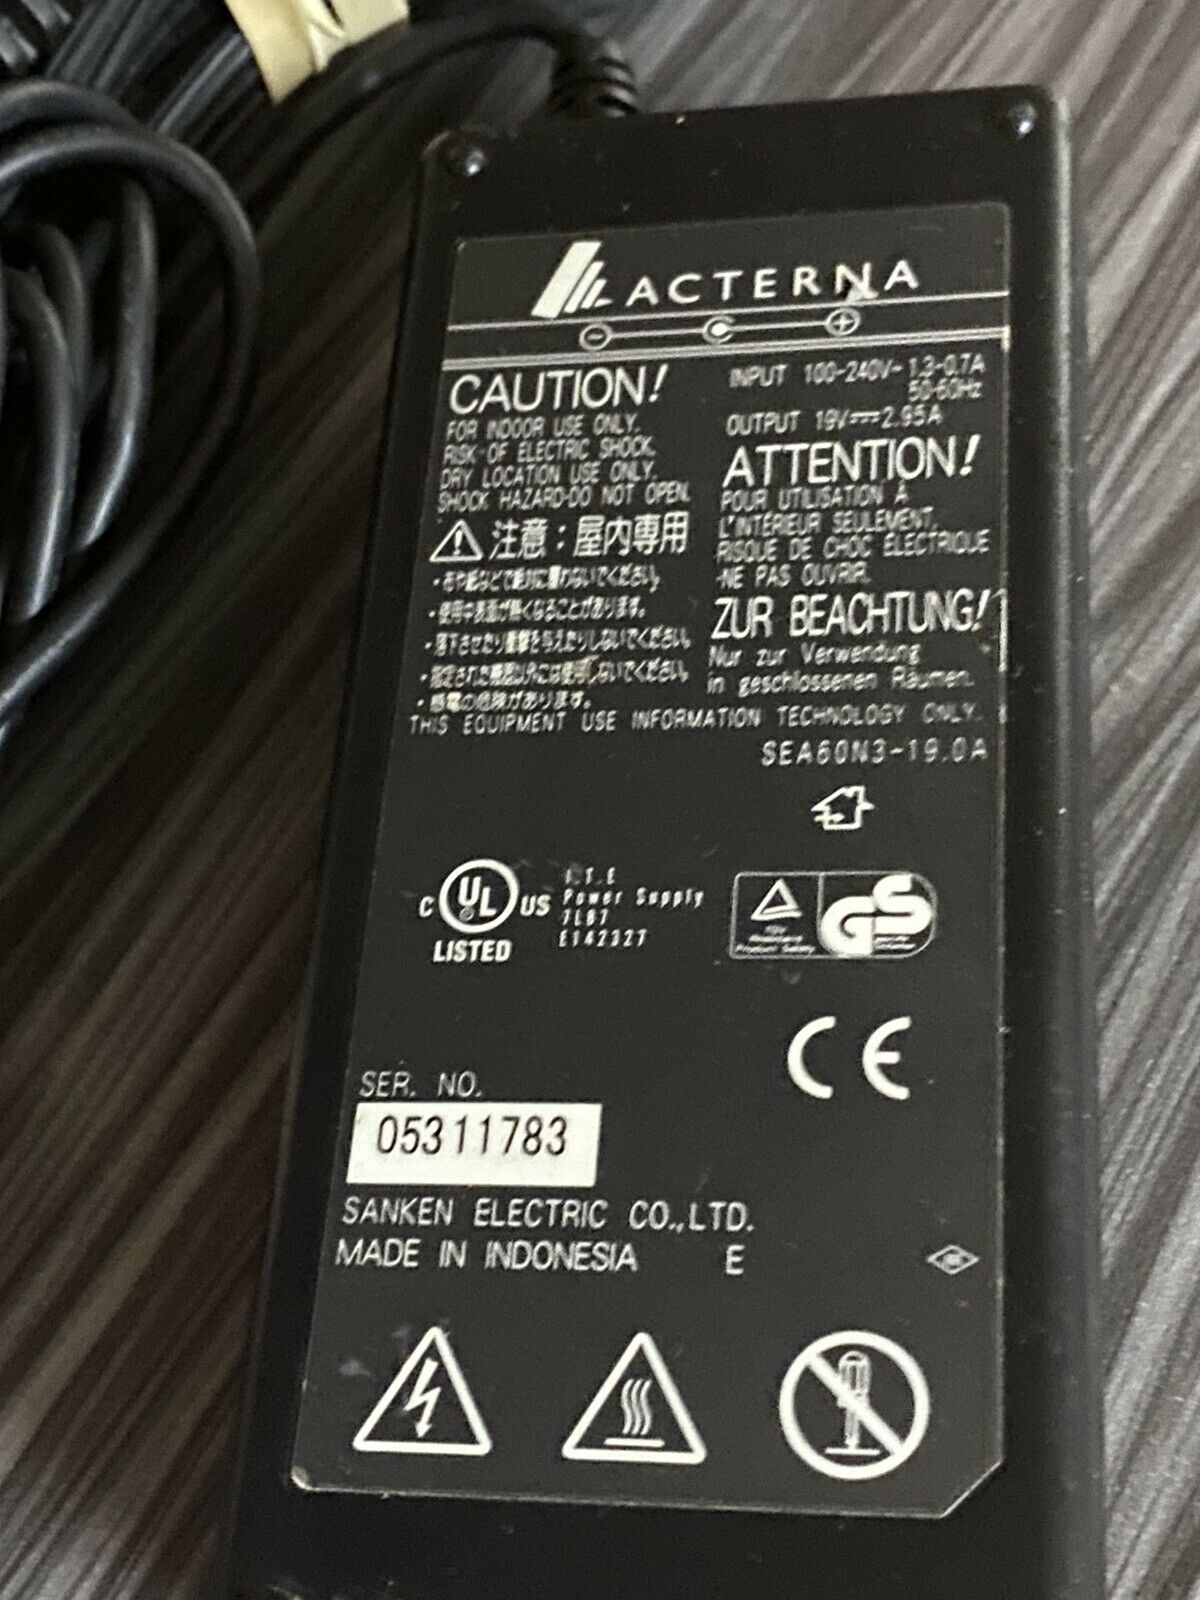 Genuine JDSU SEA60N3-19A Acterna AC Adapter Charger 19V 2.95A w/P.Cord OEM MPN: Does not apply Voltage: 19 V Comp - Click Image to Close